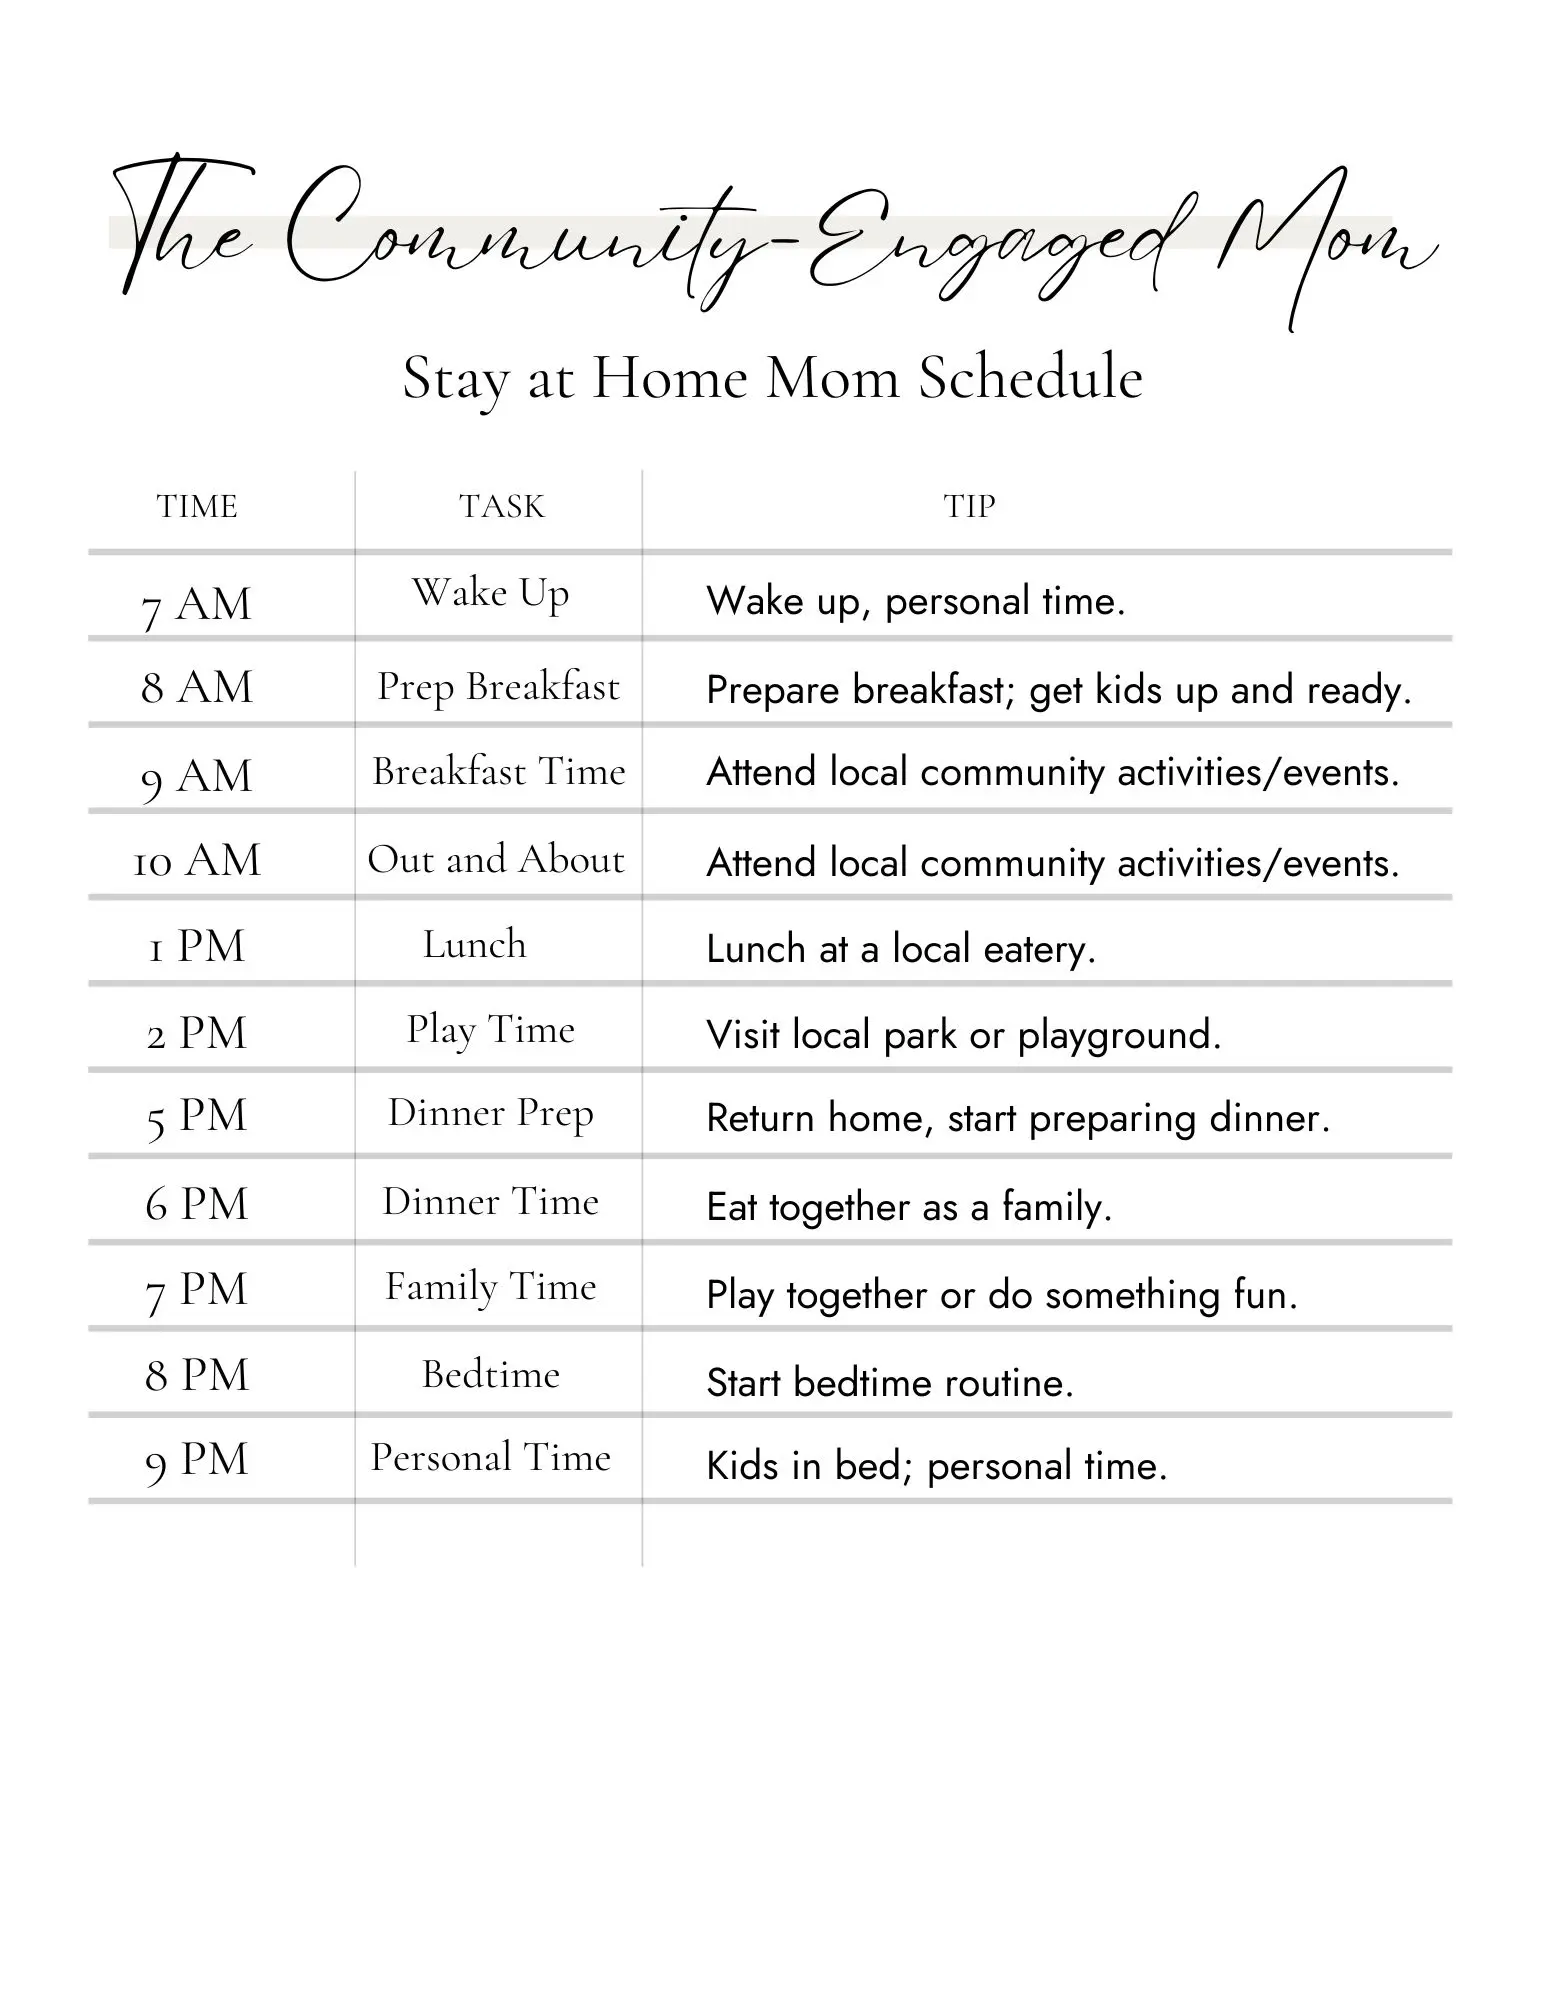 image of a stay at home mom schedule for a community engaged mom